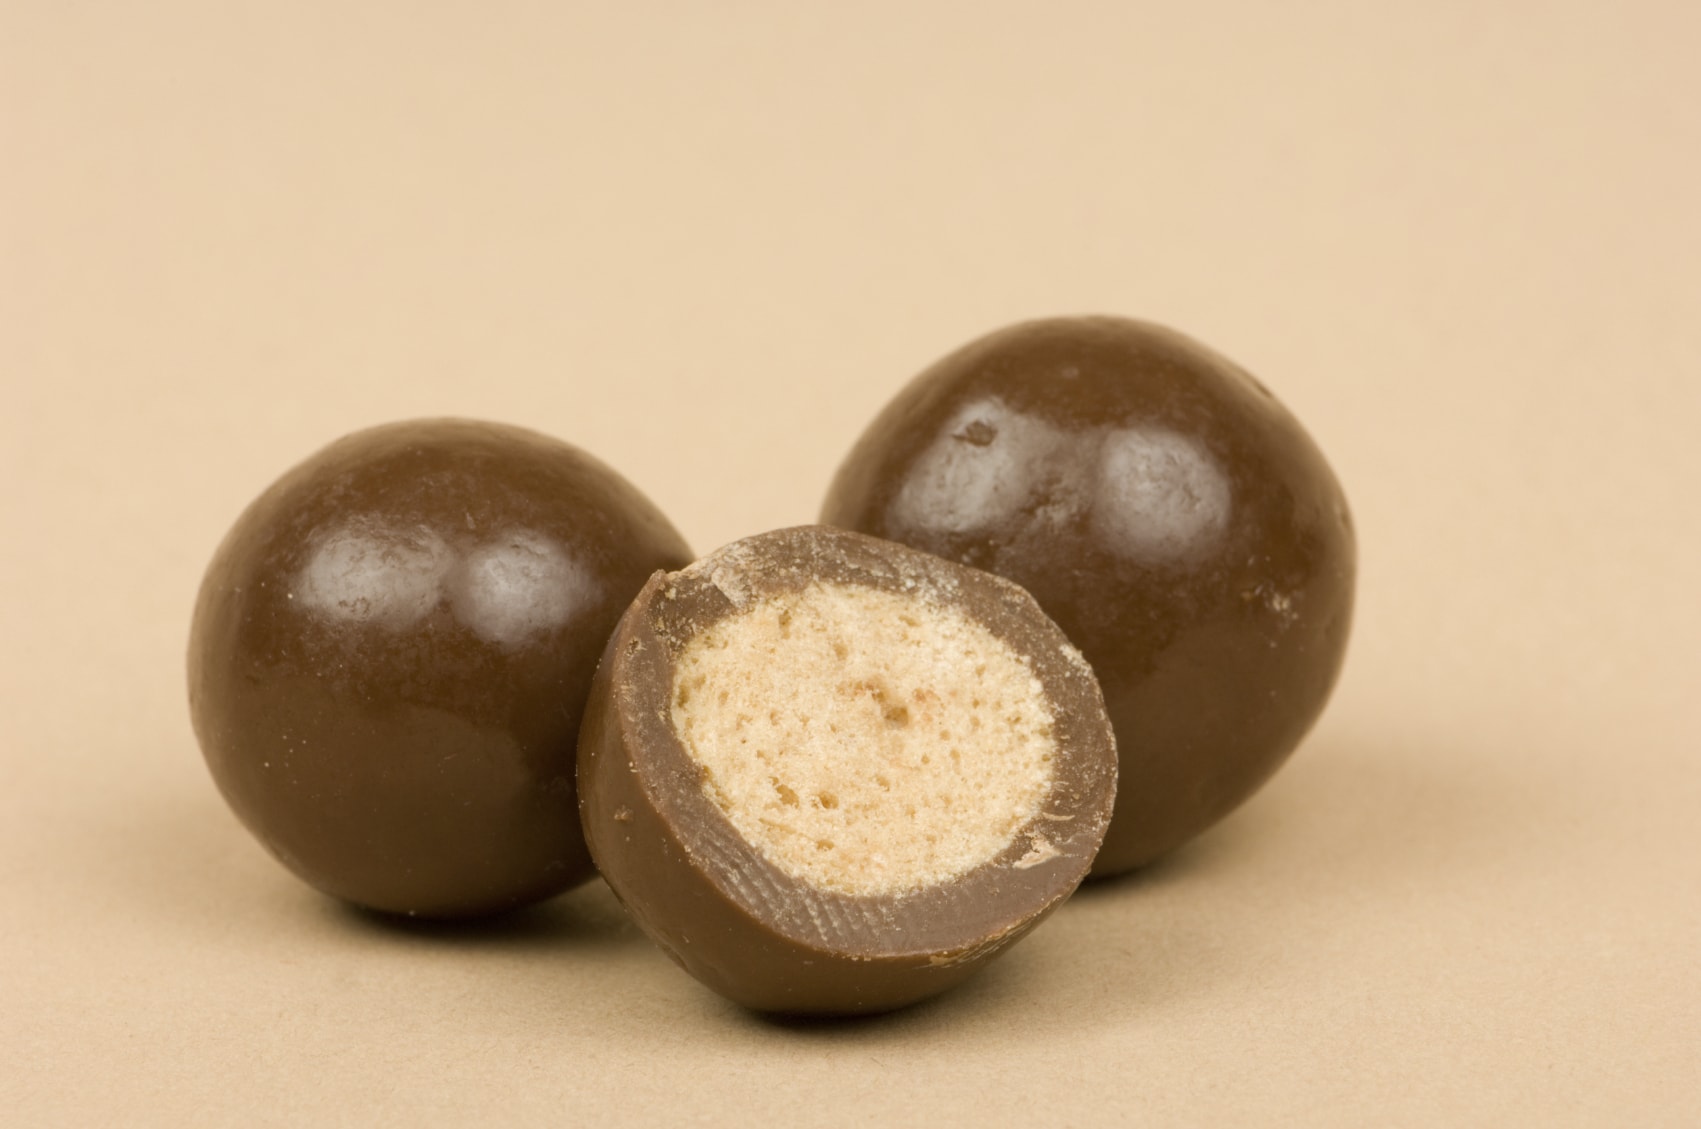 Macro/close-up image of chocolate malted milk balls candy. The front chocolate has been cut in half revealing the hard but airy malt in the middle. On light brown background.